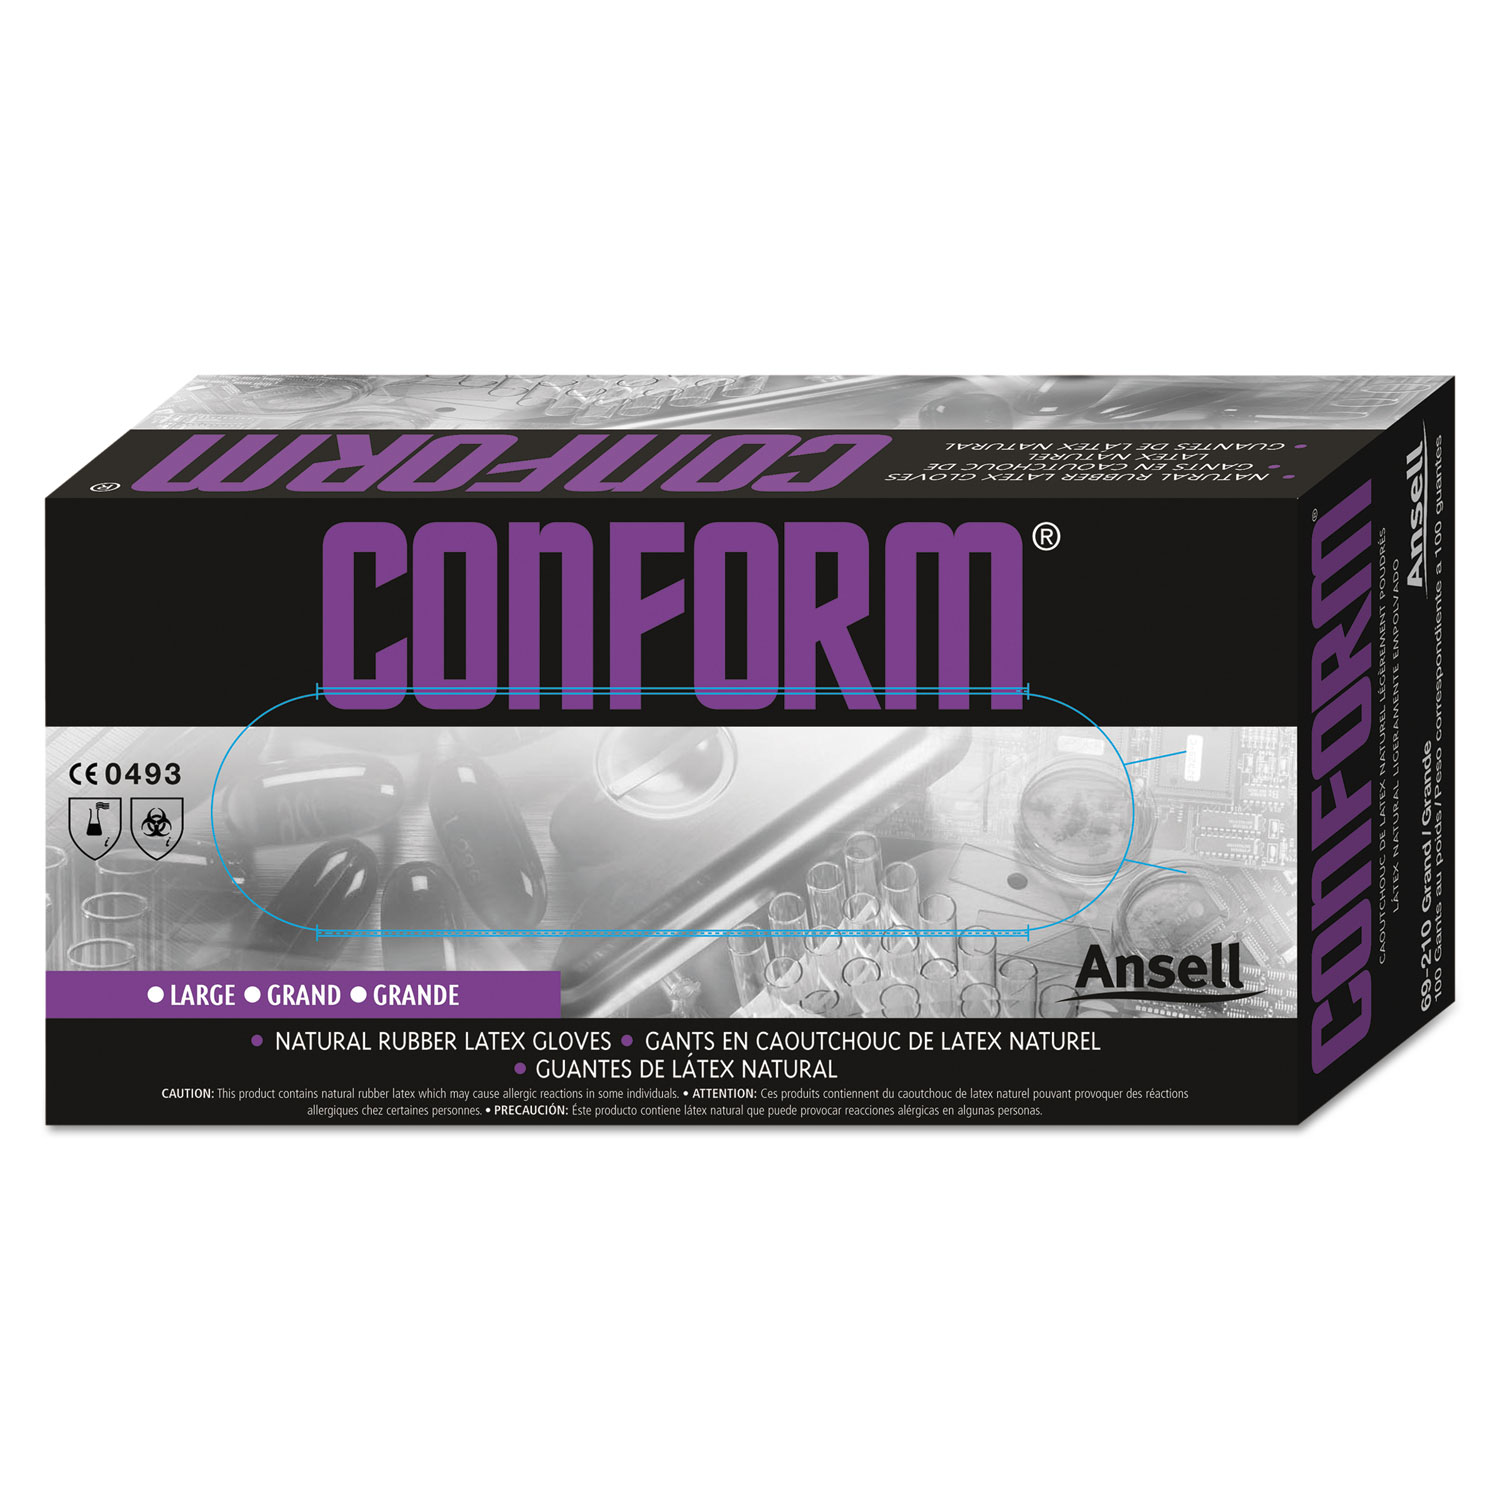  AnsellPro 516704 Conform Natural Rubber Latex Gloves, 5 mil, Small, 100/Box (ANS69210SCT) 